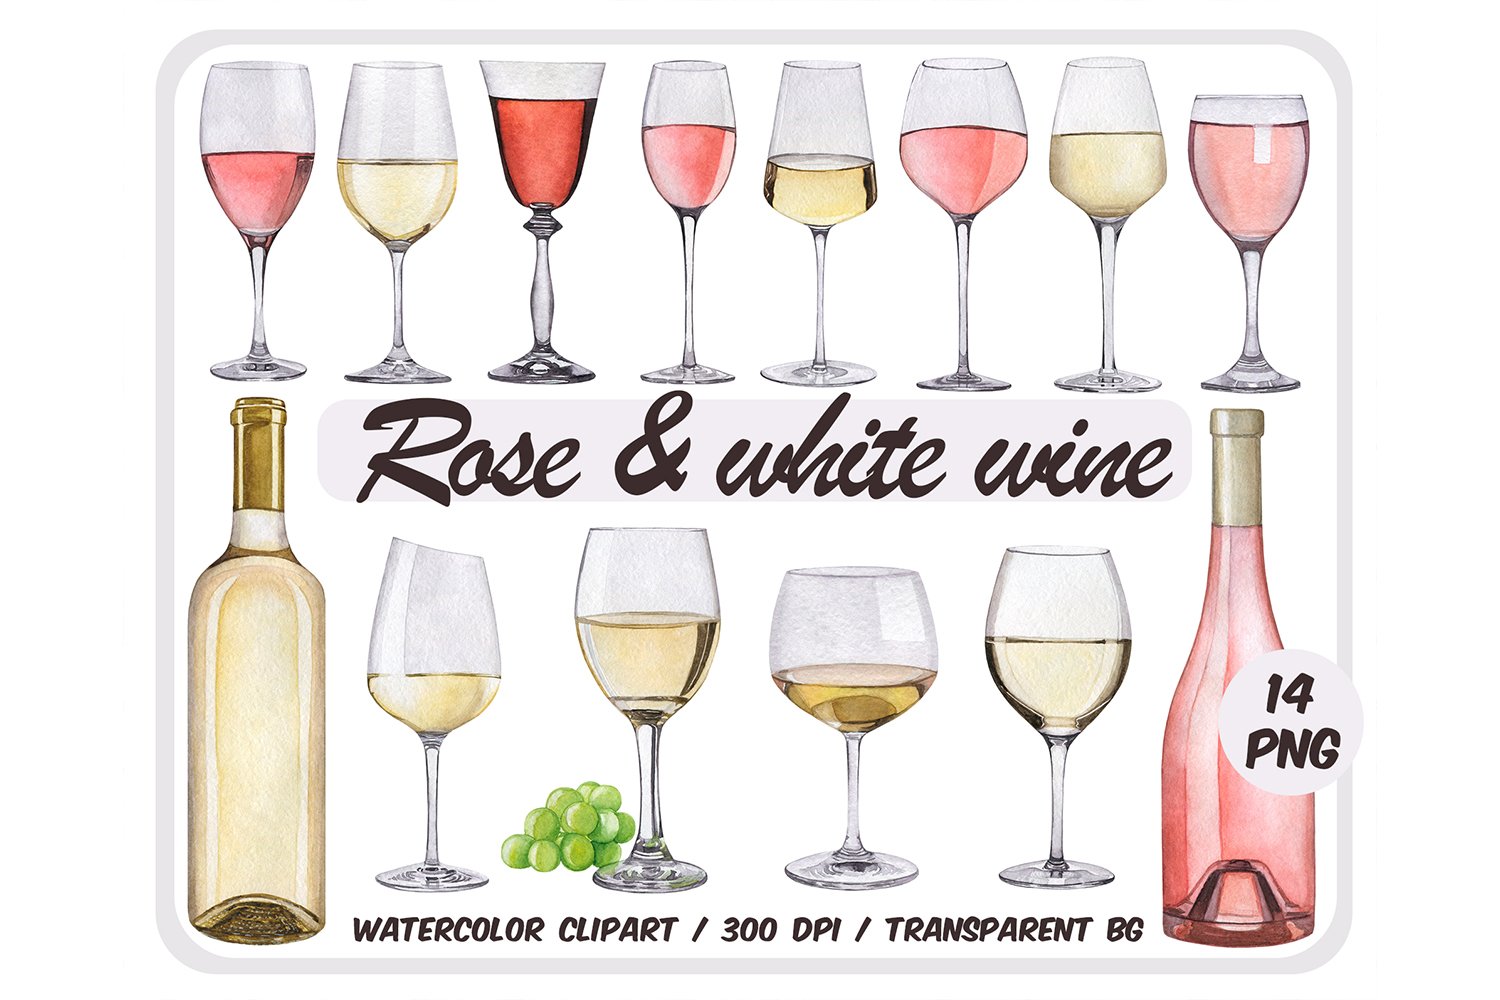 Watercolor white & rose wine clipart cover image.